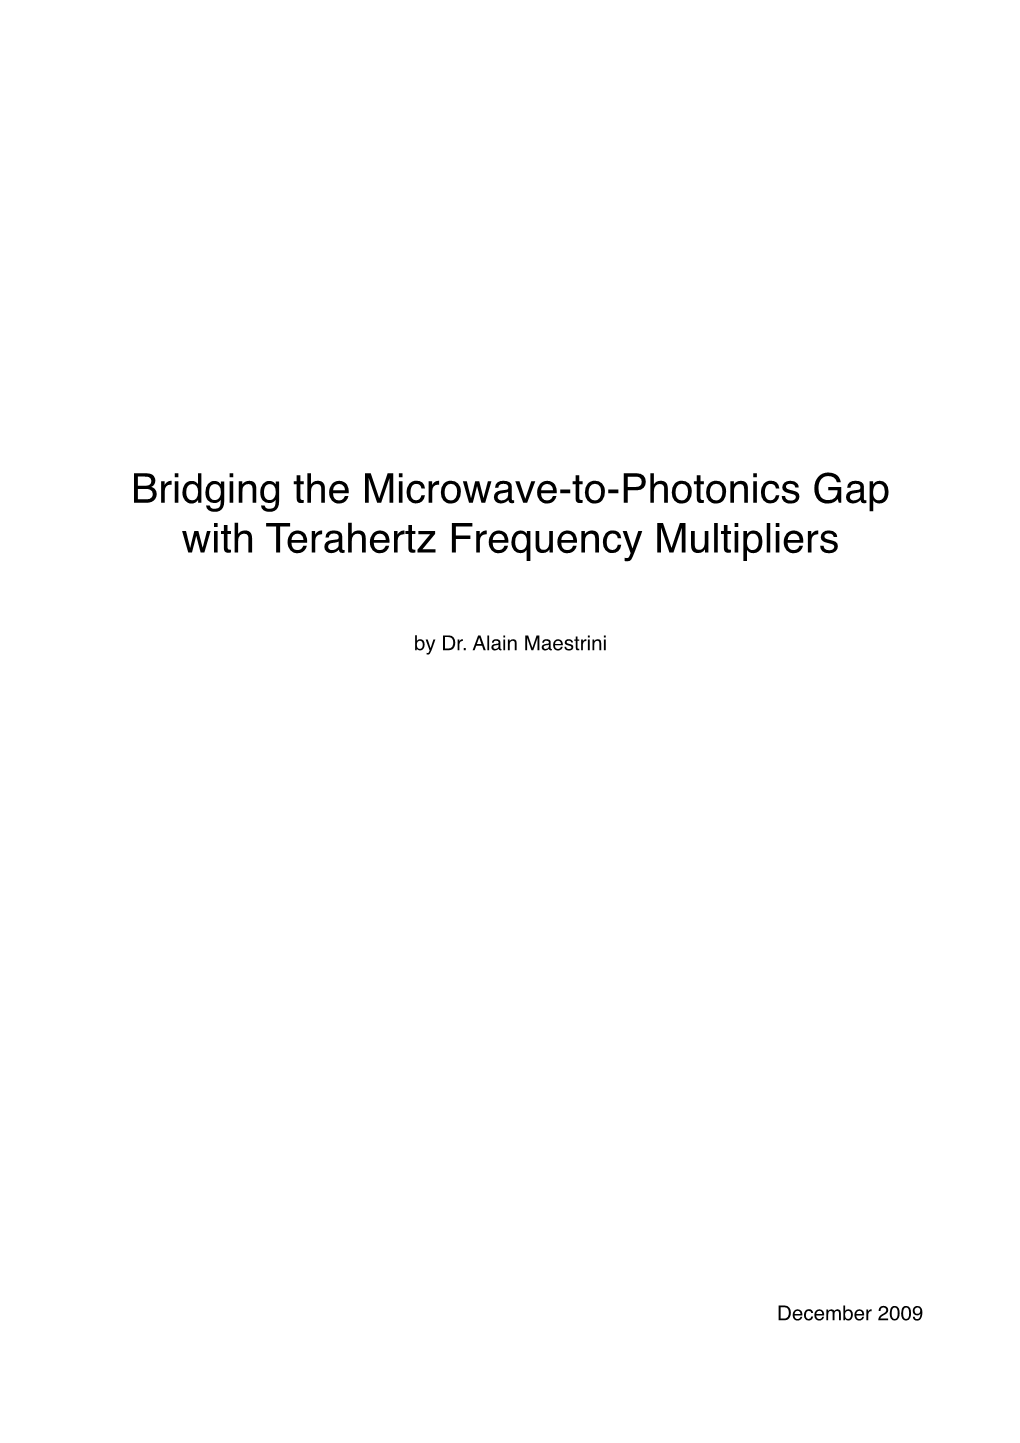 Bridging the Microwave-To-Photonics Gap with Terahertz Frequency Multipliers